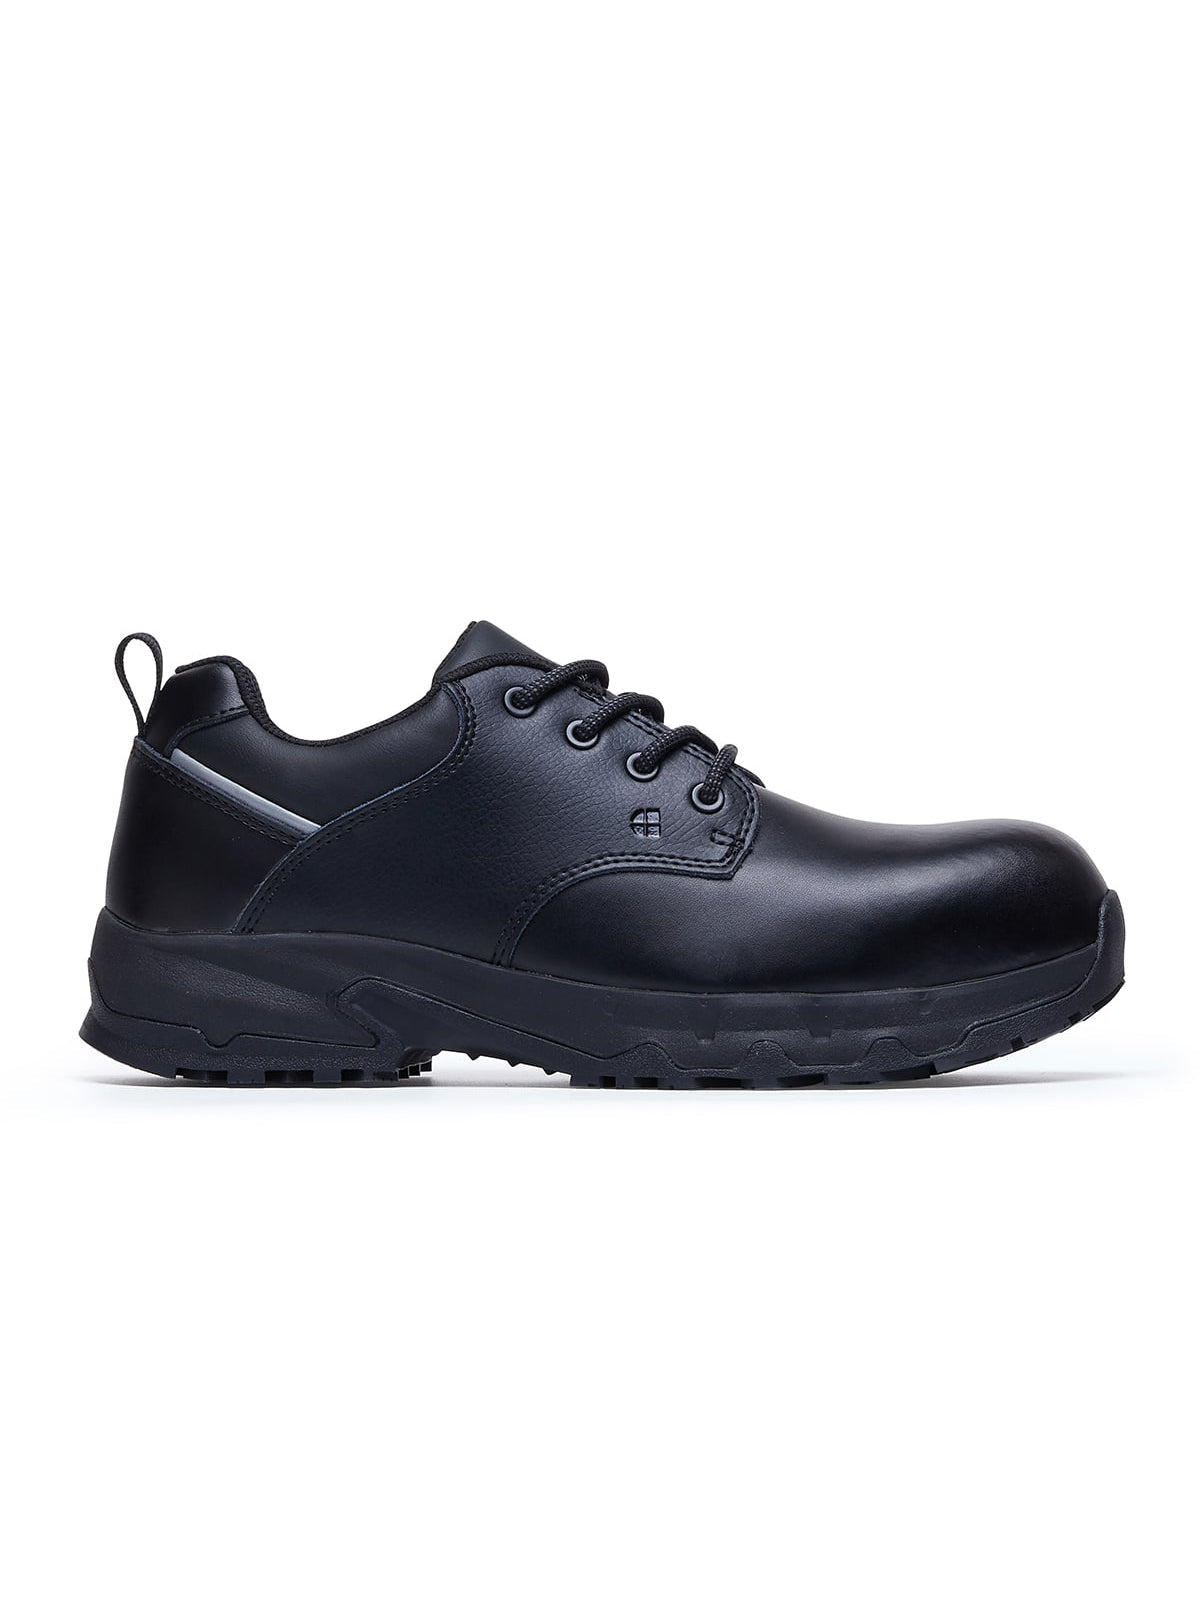 Unisex Safety Shoe Forkhill (S3) by  Shoes For Crews.